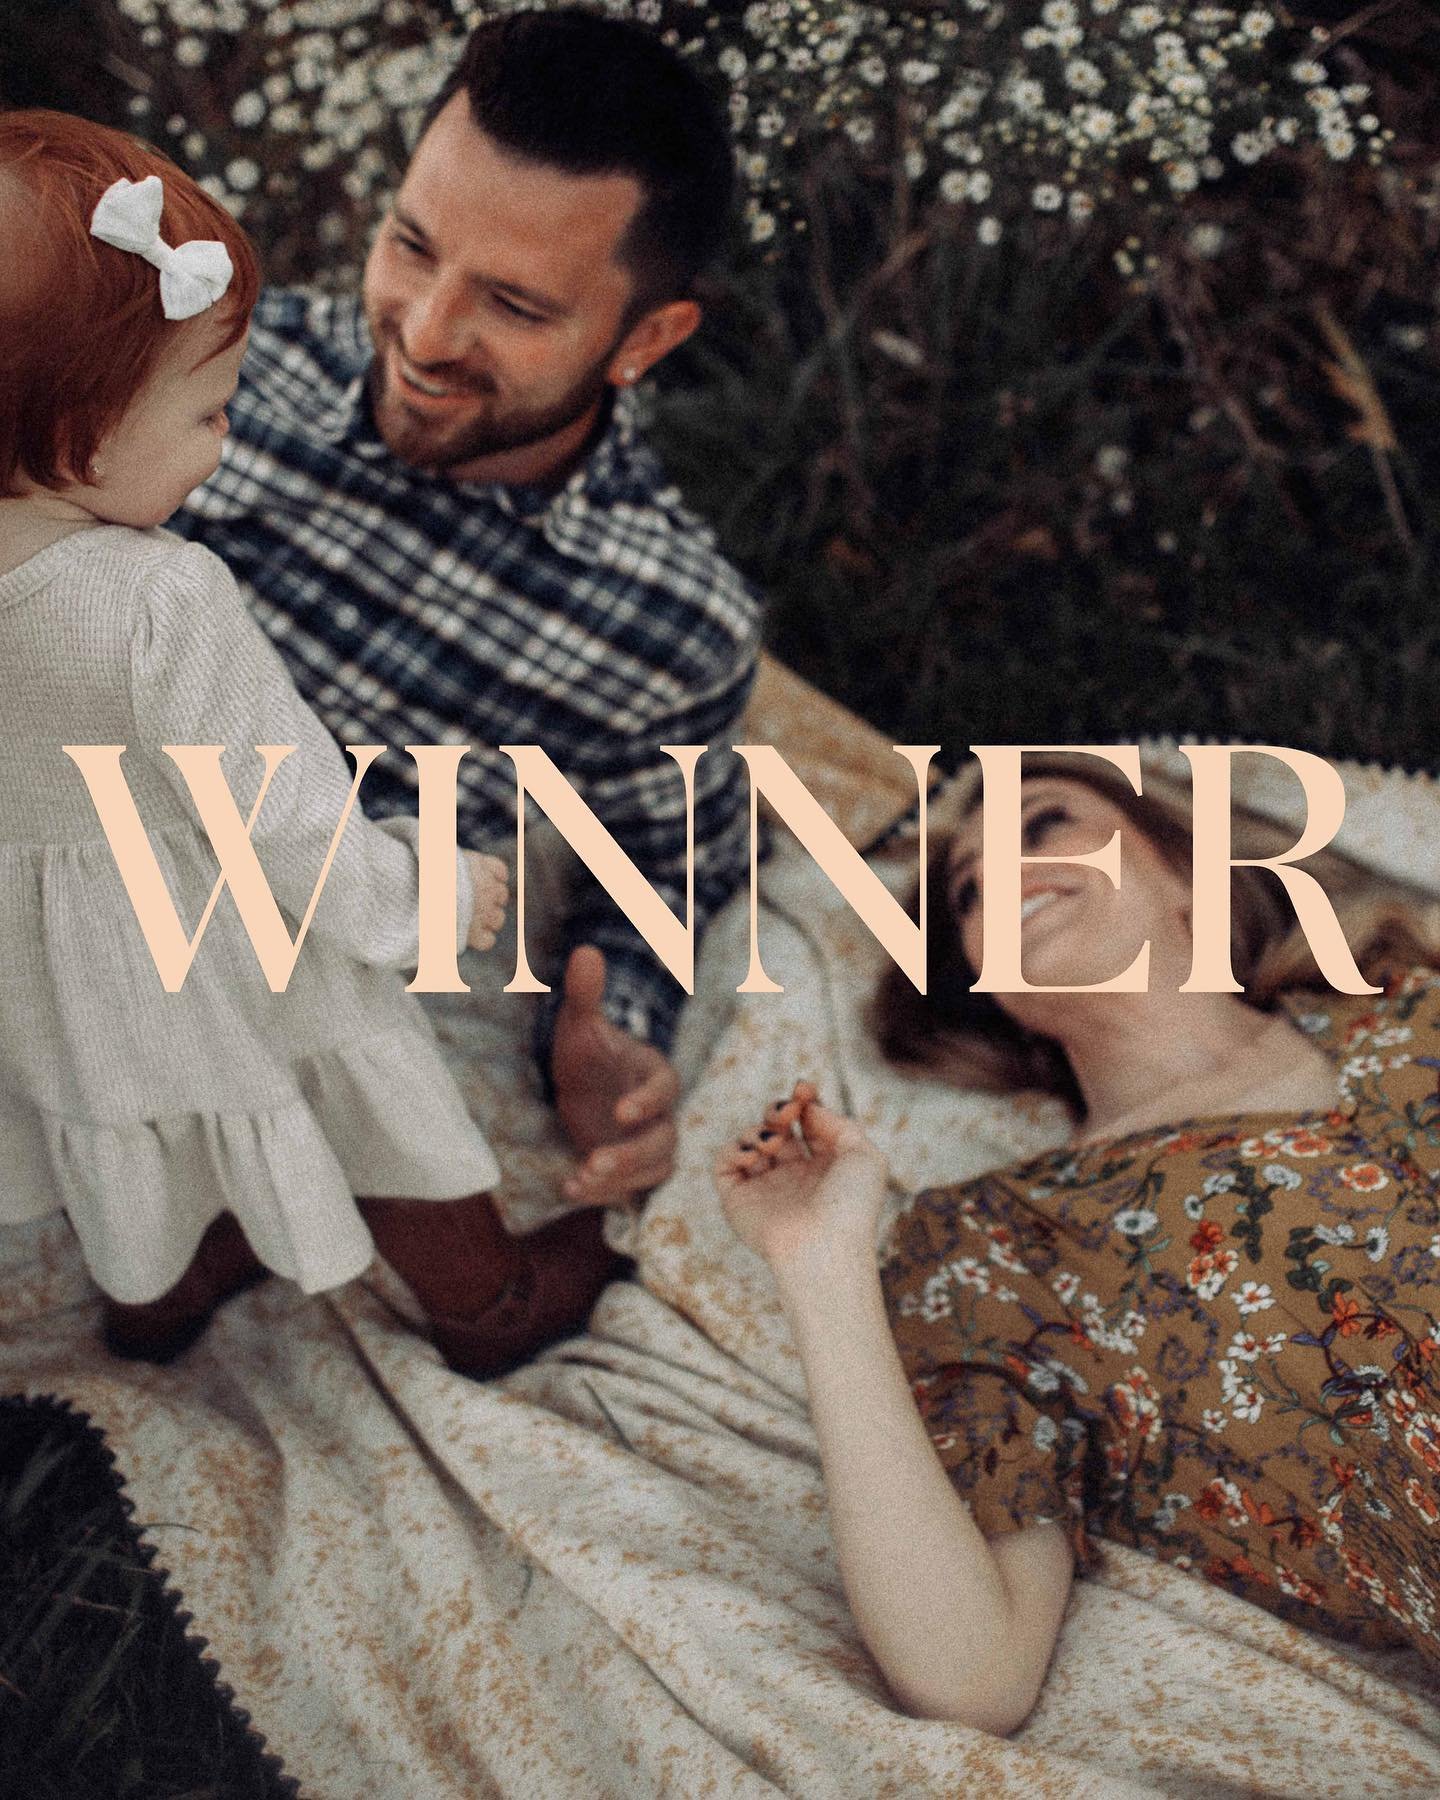 ✨(Read to the end for a surprise)

🍃Congratulations to our first place winner @janelledoerner who has won a Storytelling Session worth $500 ! I&rsquo;m so excited for you Janelle! 👏🏻

🍃And I decided we needed a second place winner as well. @shelb